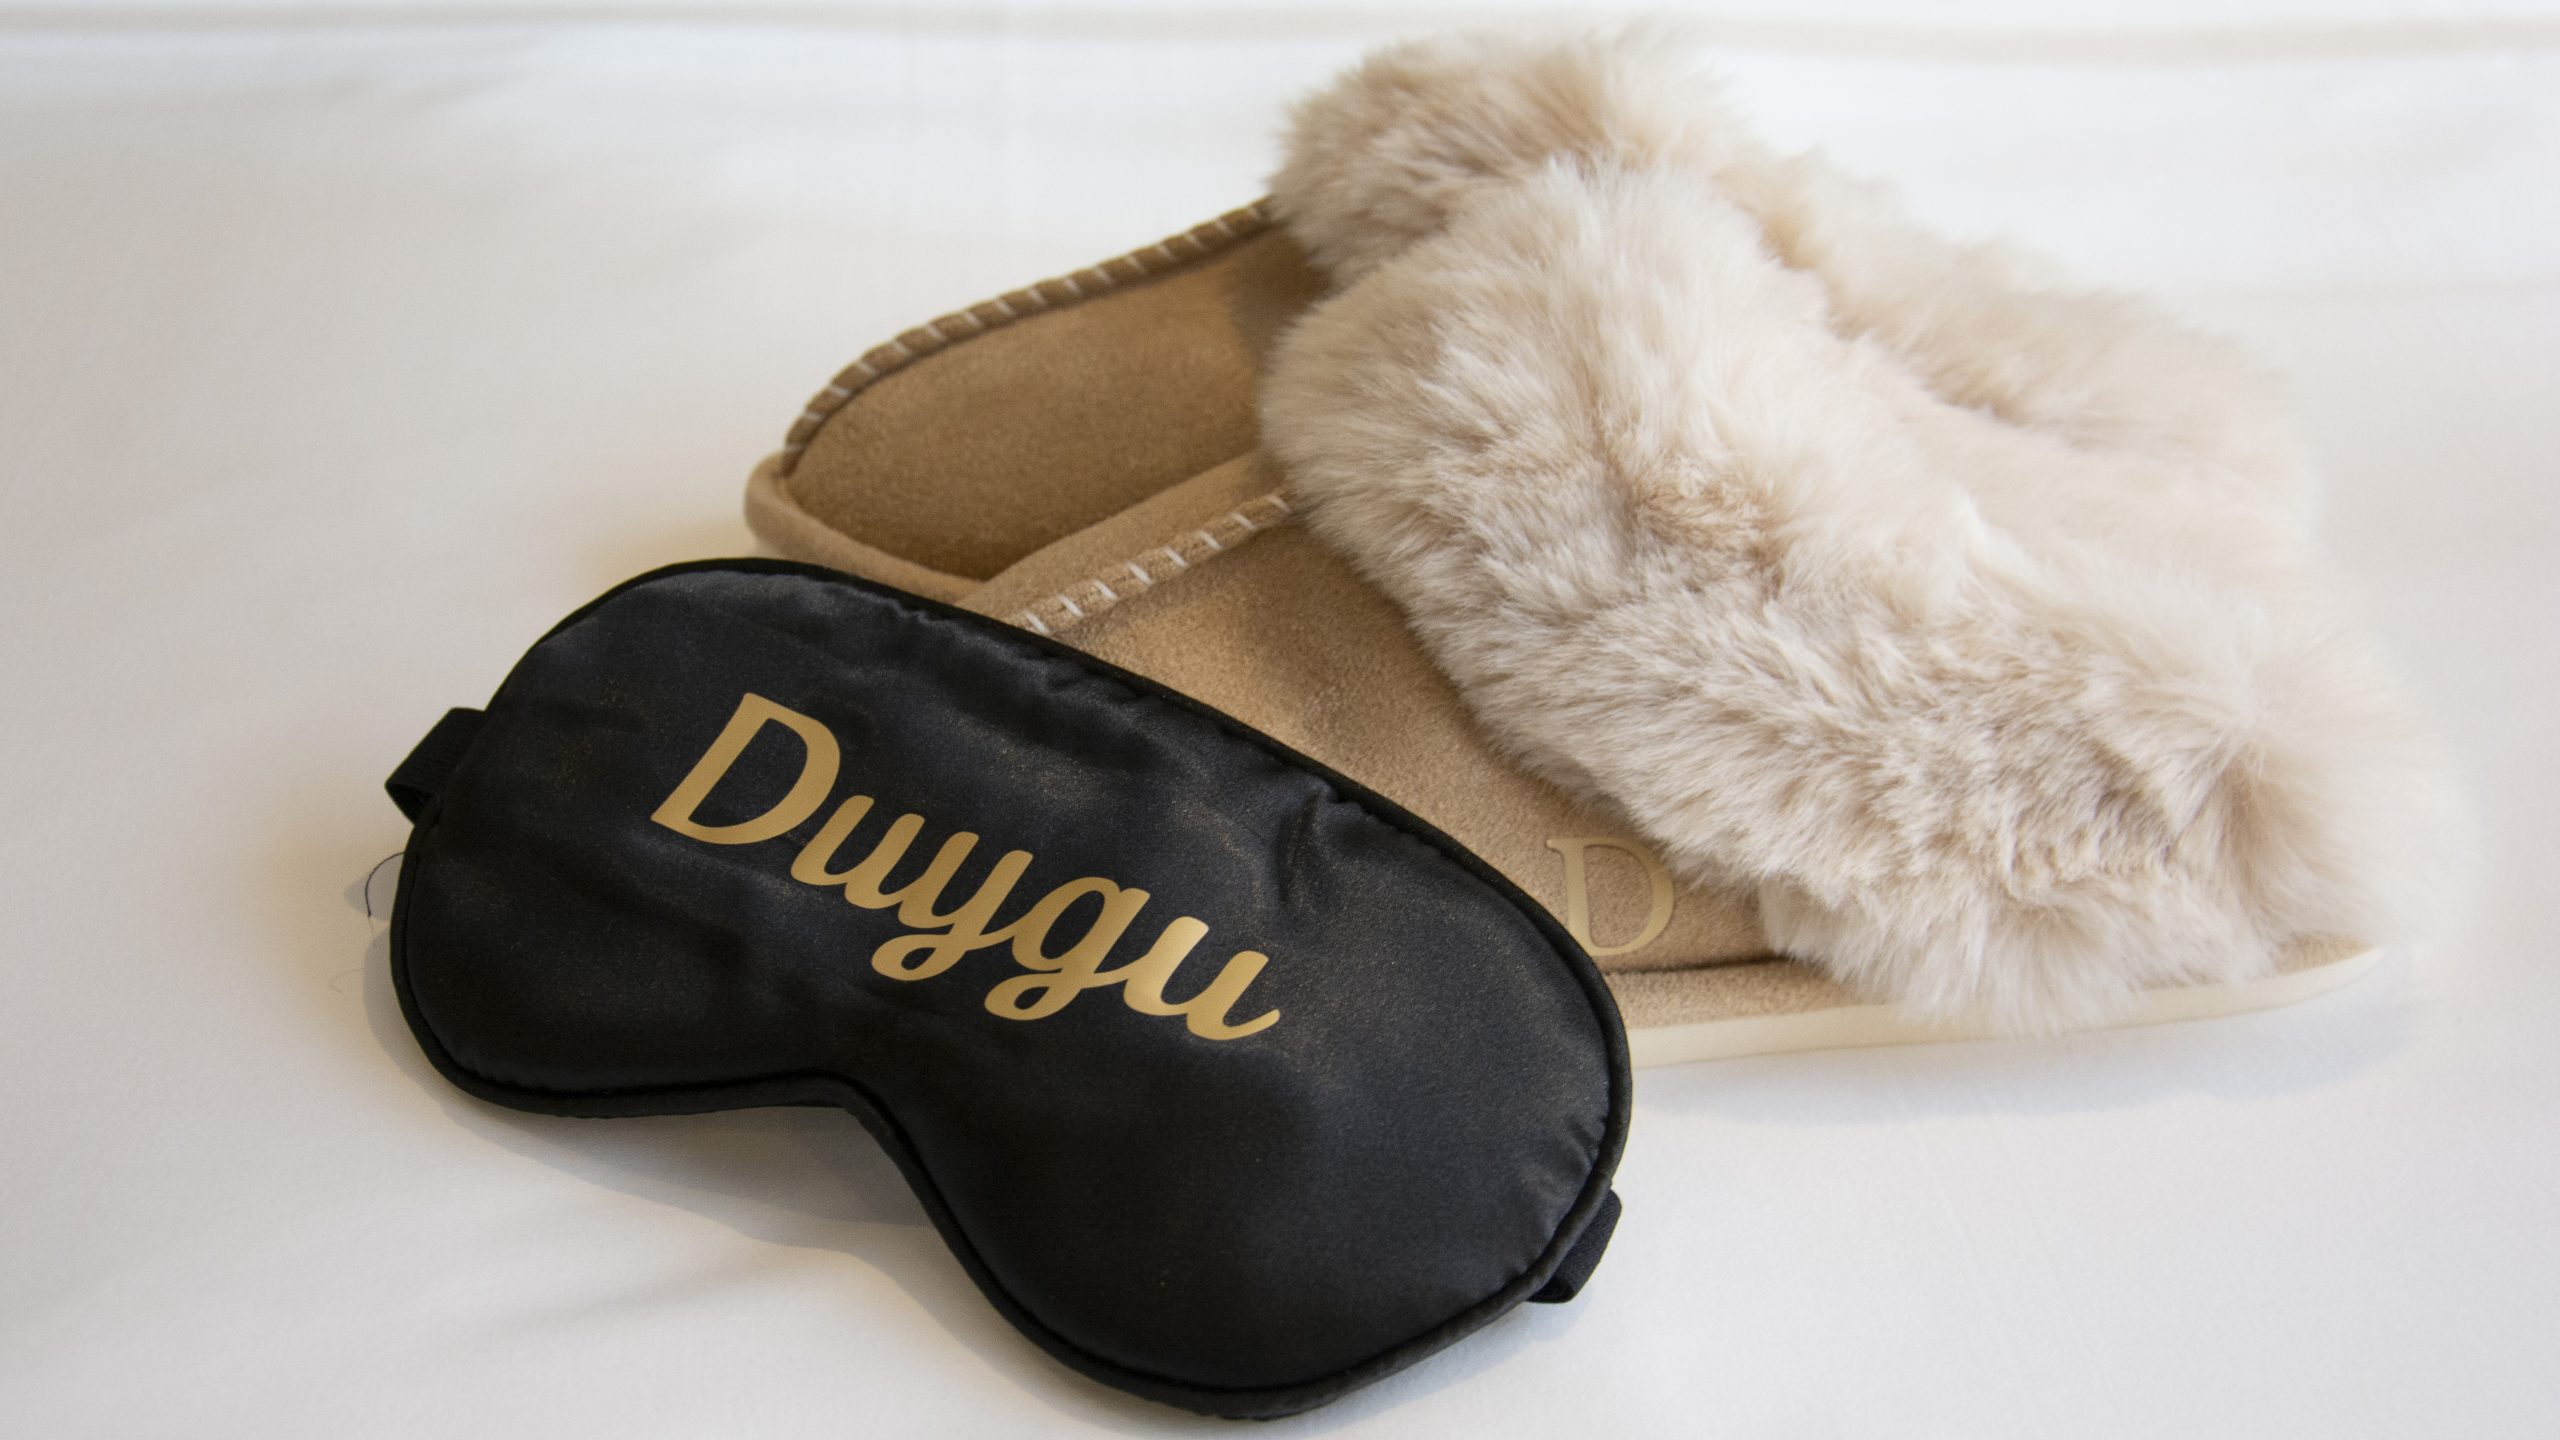 Personalised slippers and sleep mask made with Cricut